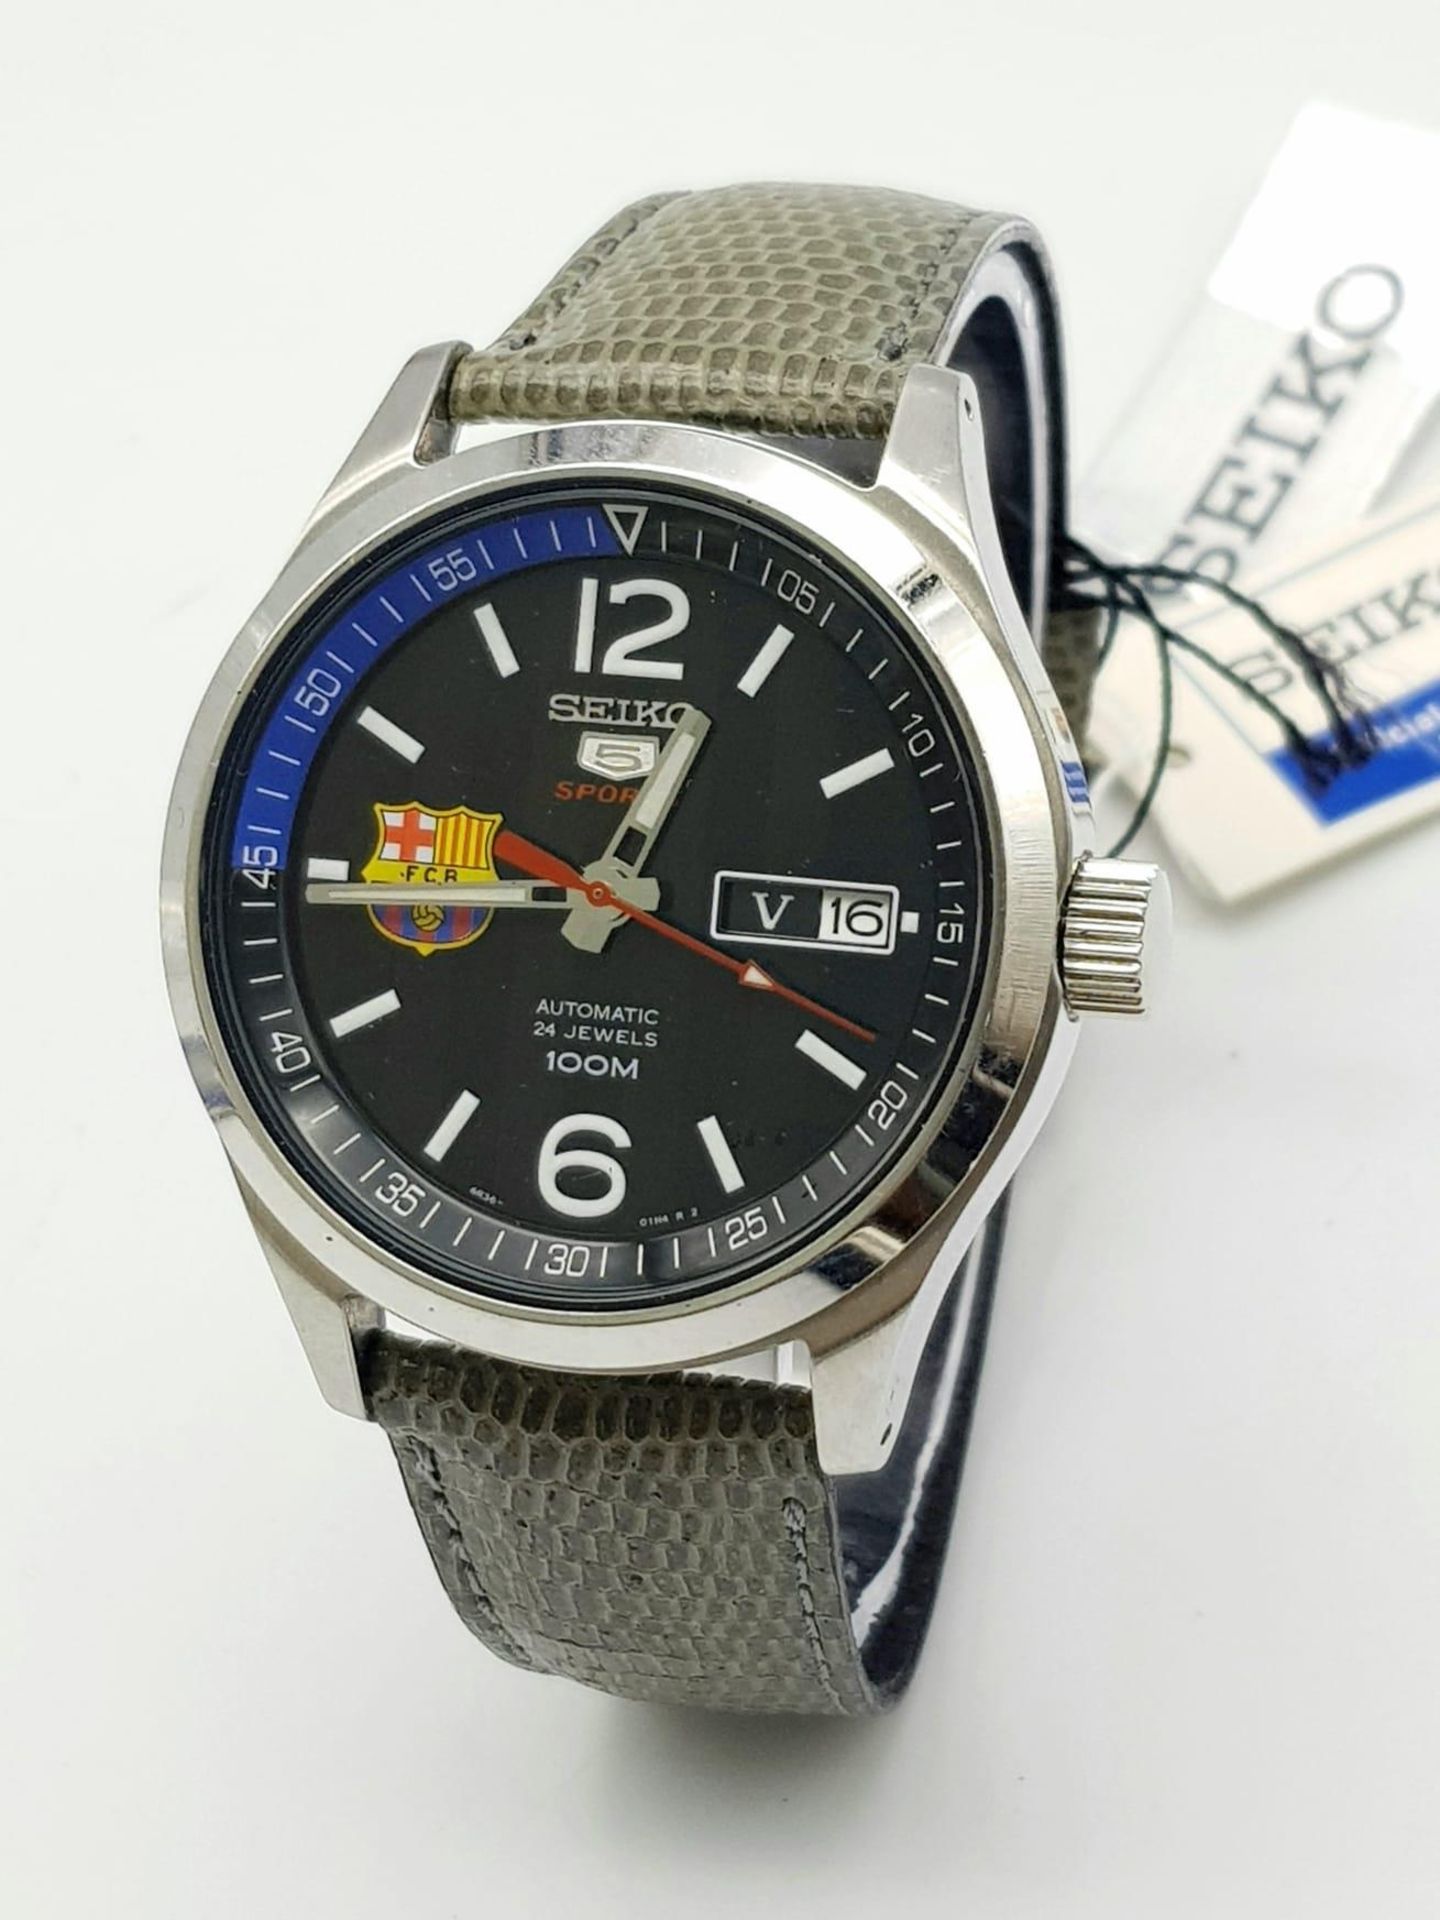 A SEIKO "BARCELONA F.C."AUTOMATIC GENTS WATCH WITH SKELETON BACK , NEVER WORN AS NEW WITH TAGS STILL - Bild 2 aus 7